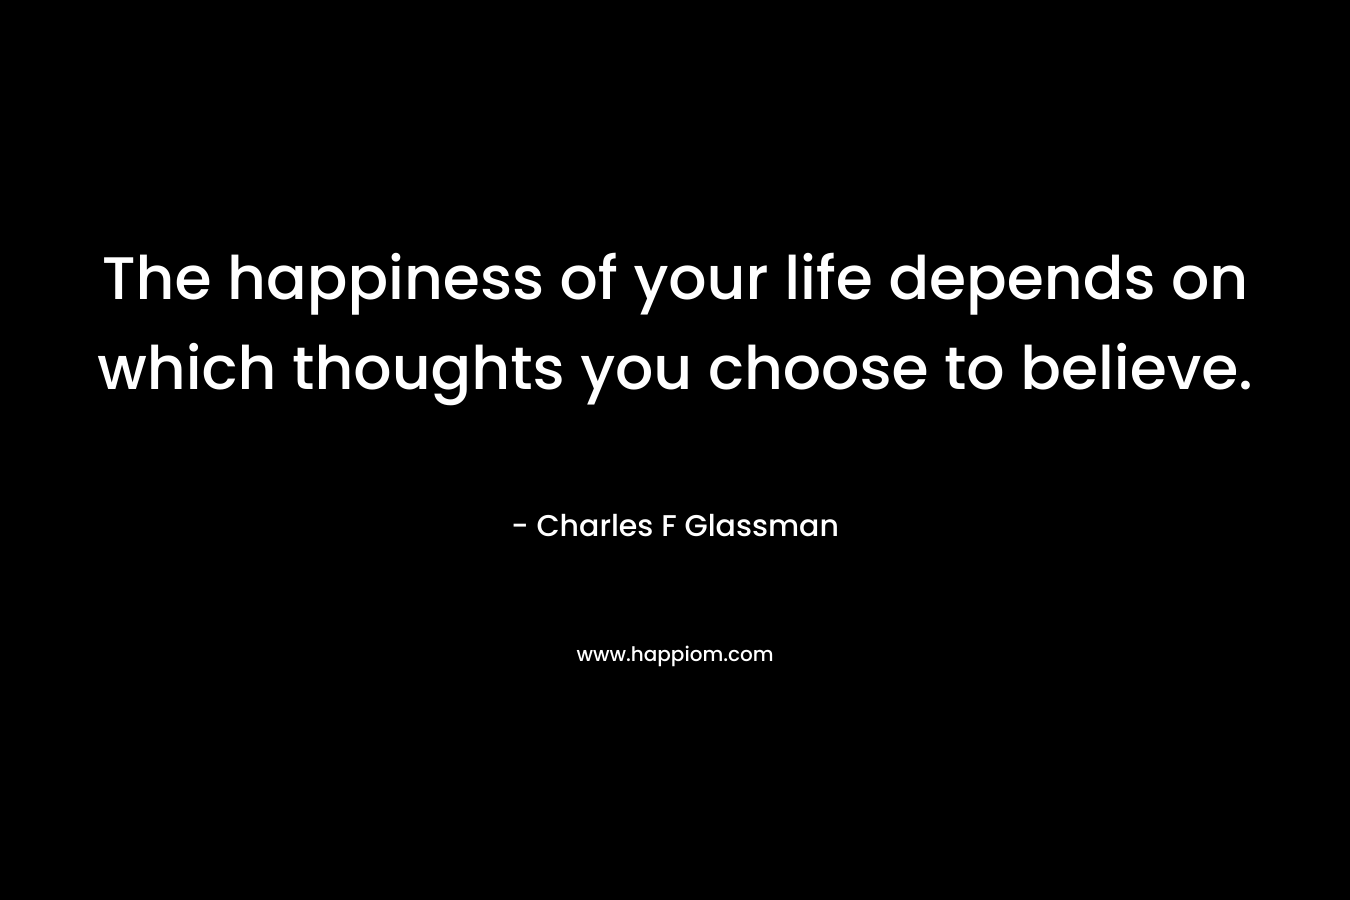 The happiness of your life depends on which thoughts you choose to believe.